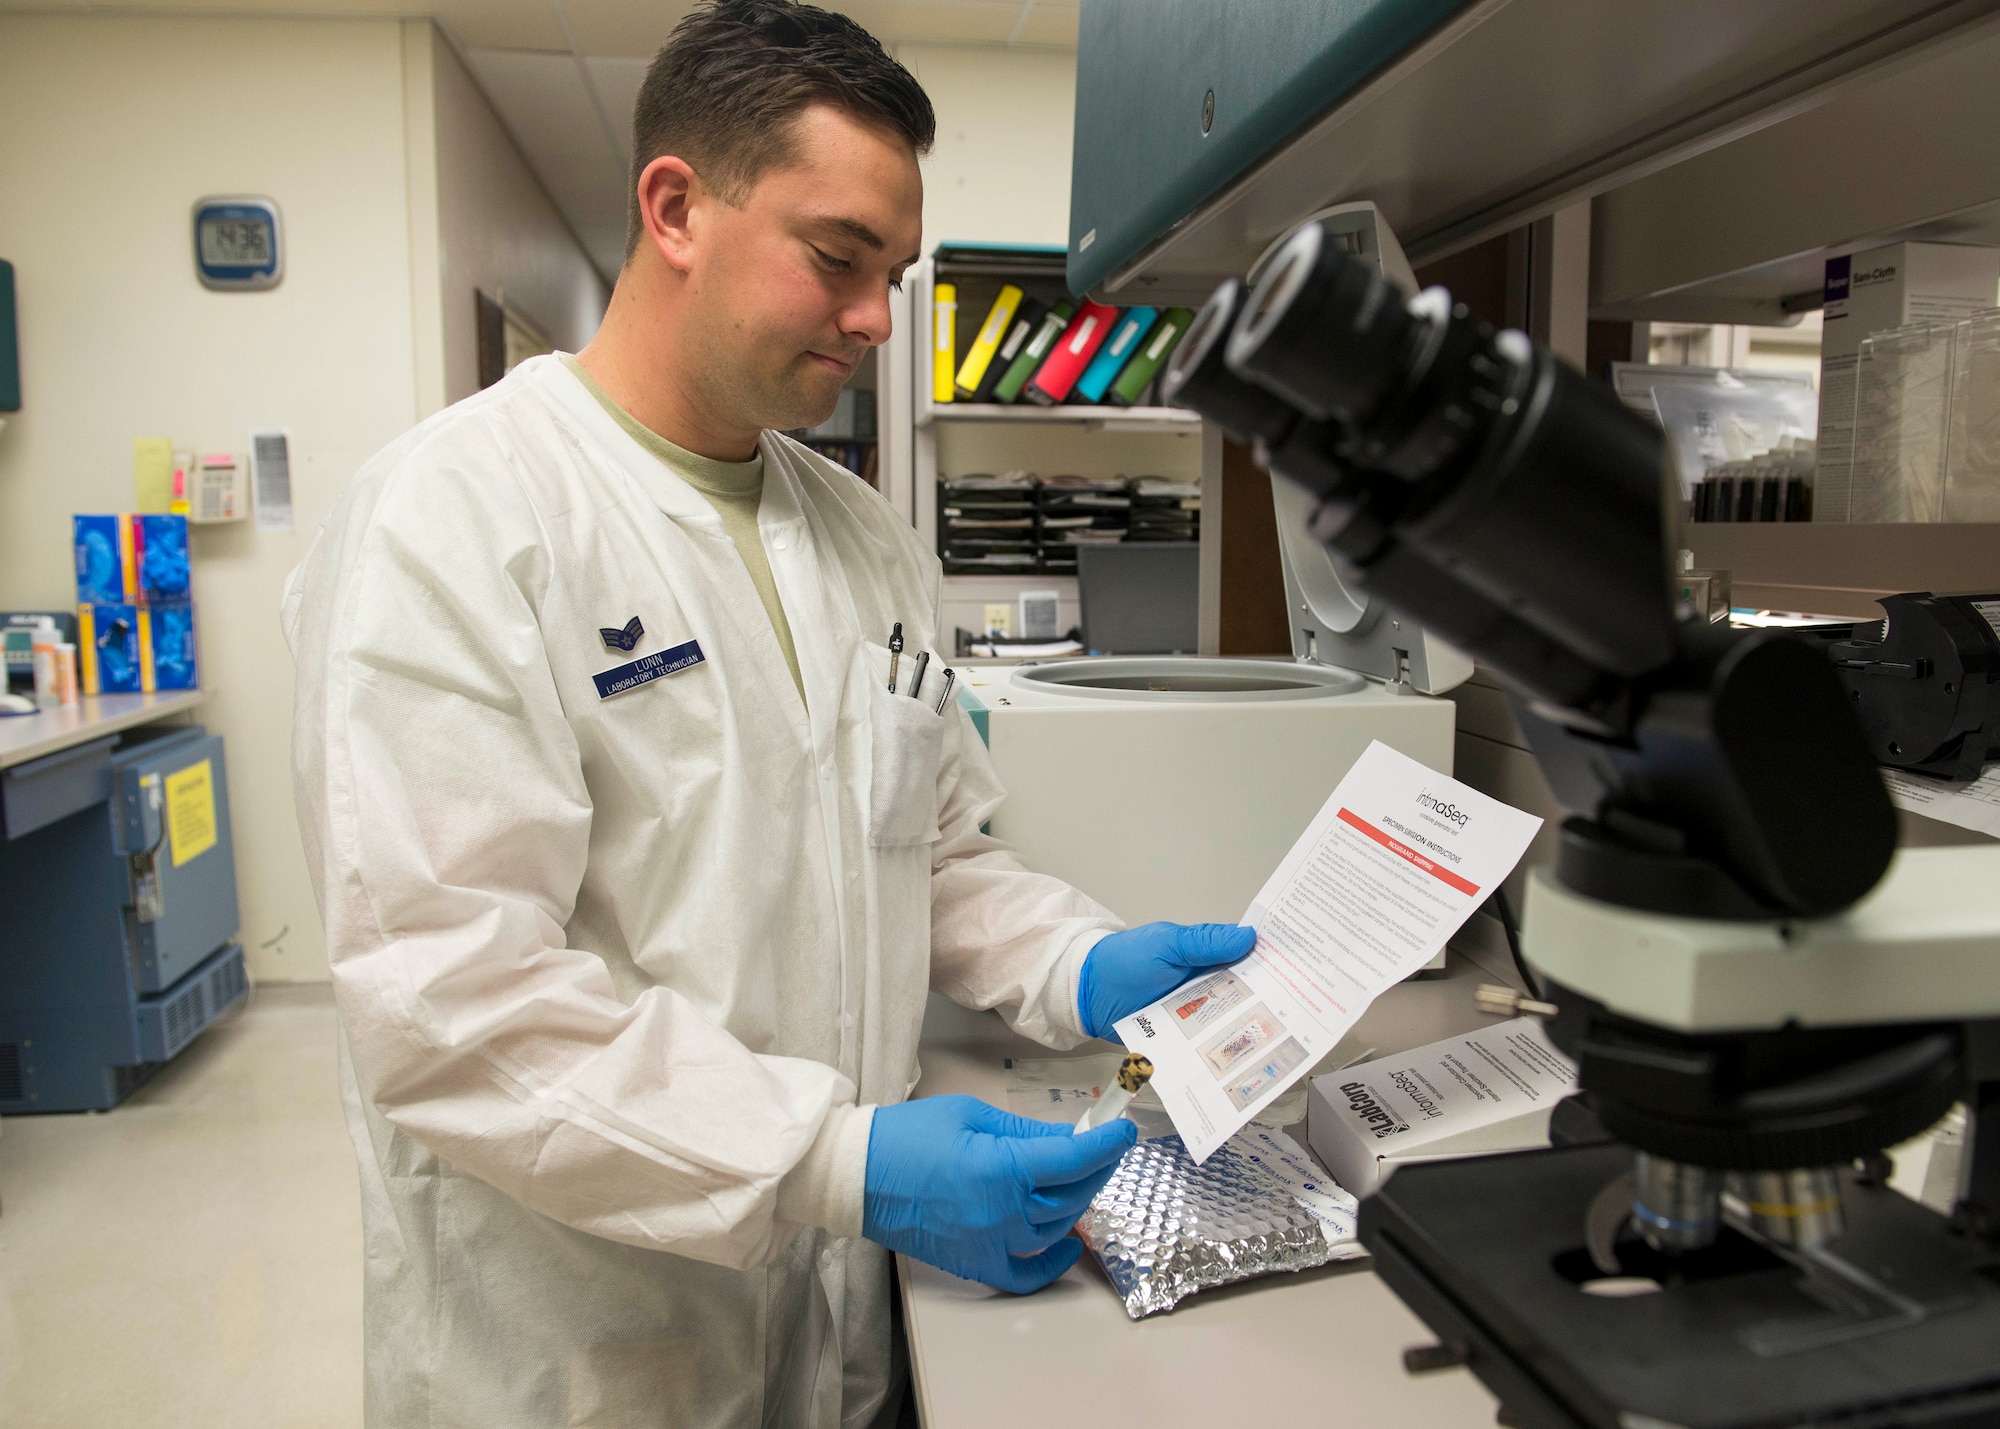 Senior Airman Zachary Lunn, 673d Medical Group medical laboratory technician, reads information for a LabCorp InformaSeq kit at Joint Base Elmendorf-Richardson, Alaska, Nov. 7, 2017. Beginning in October 2017, the 673d MDG Women’s Health Clinic replaced the Natera prenatal Panorama testing with LabCorps’ InformaSeq prenatal testing.